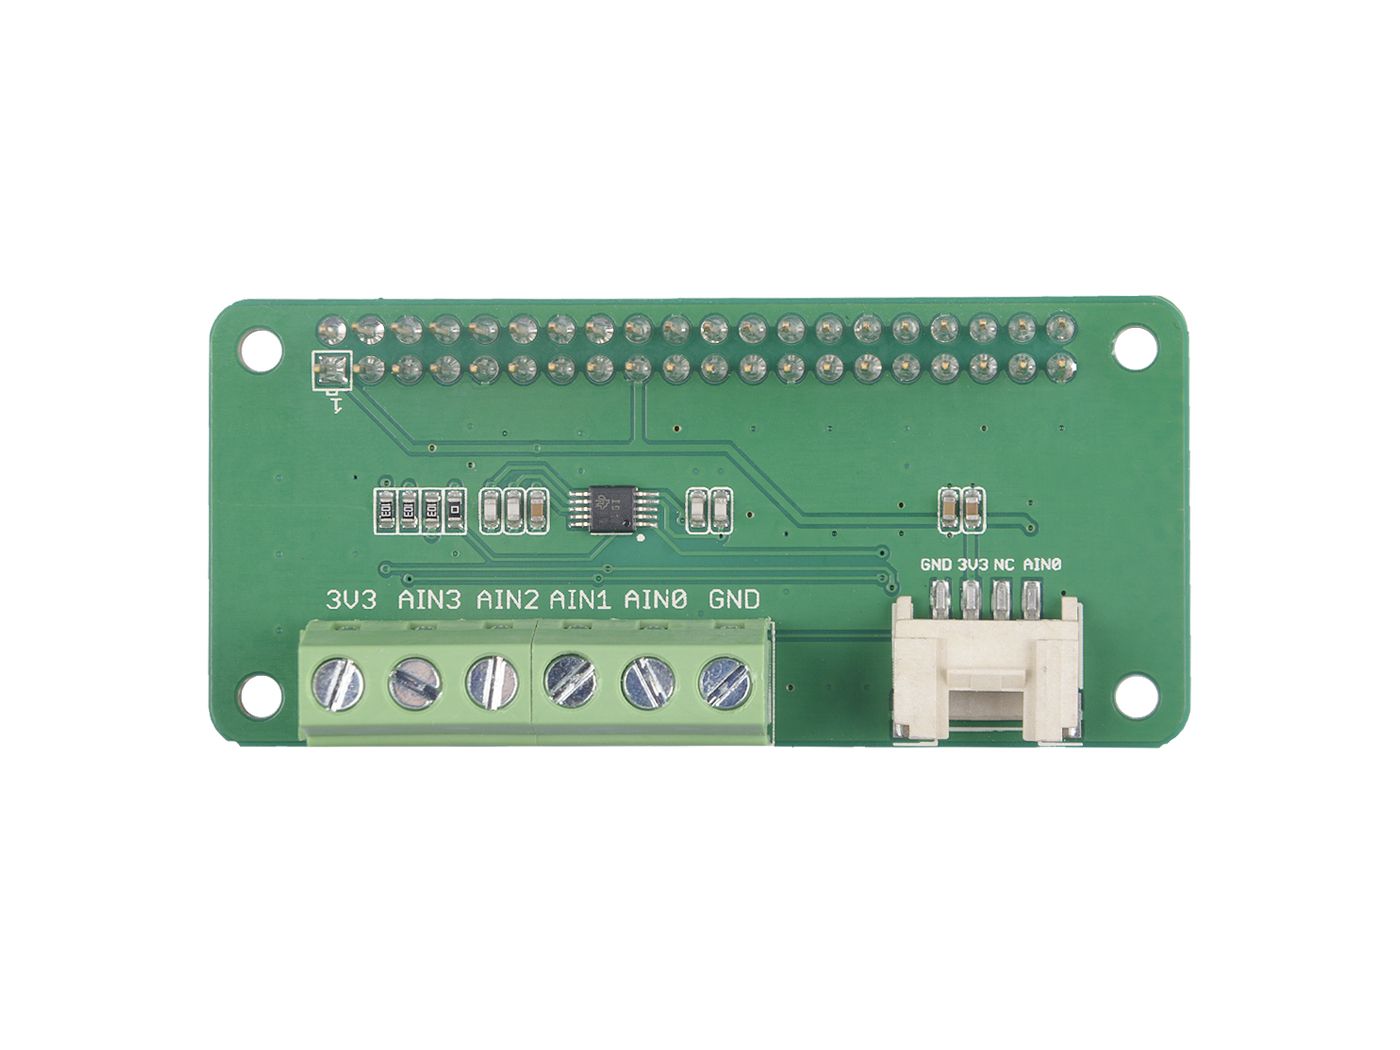 Seeed Studio 4-Channel 16-Bit ADC for Raspberry Pi